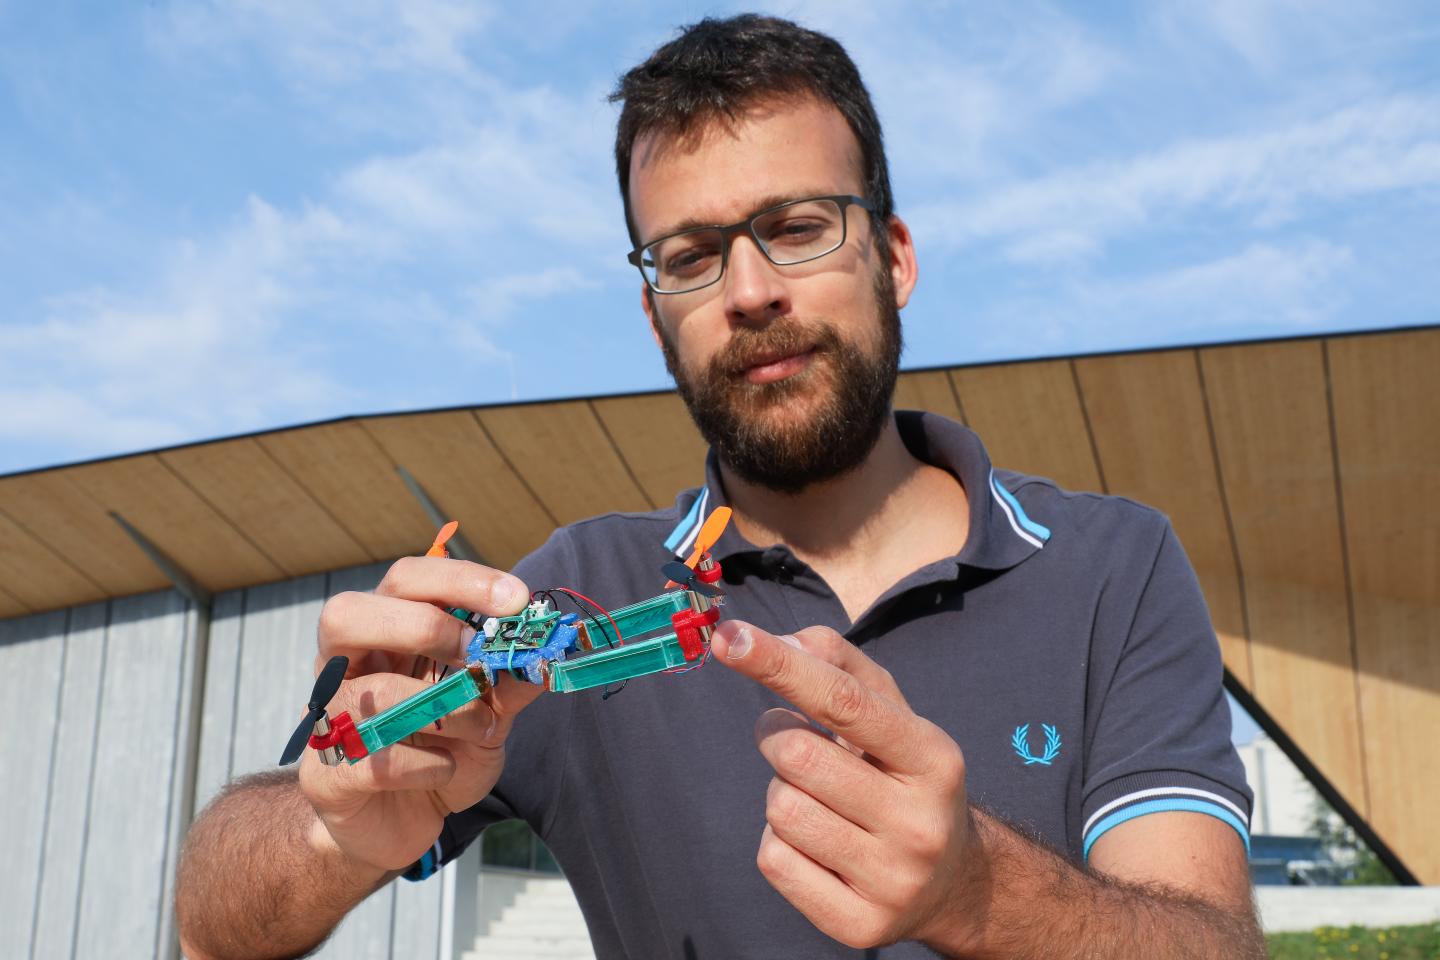 The Insect-Inspired Drone Can Deform Upon Impact